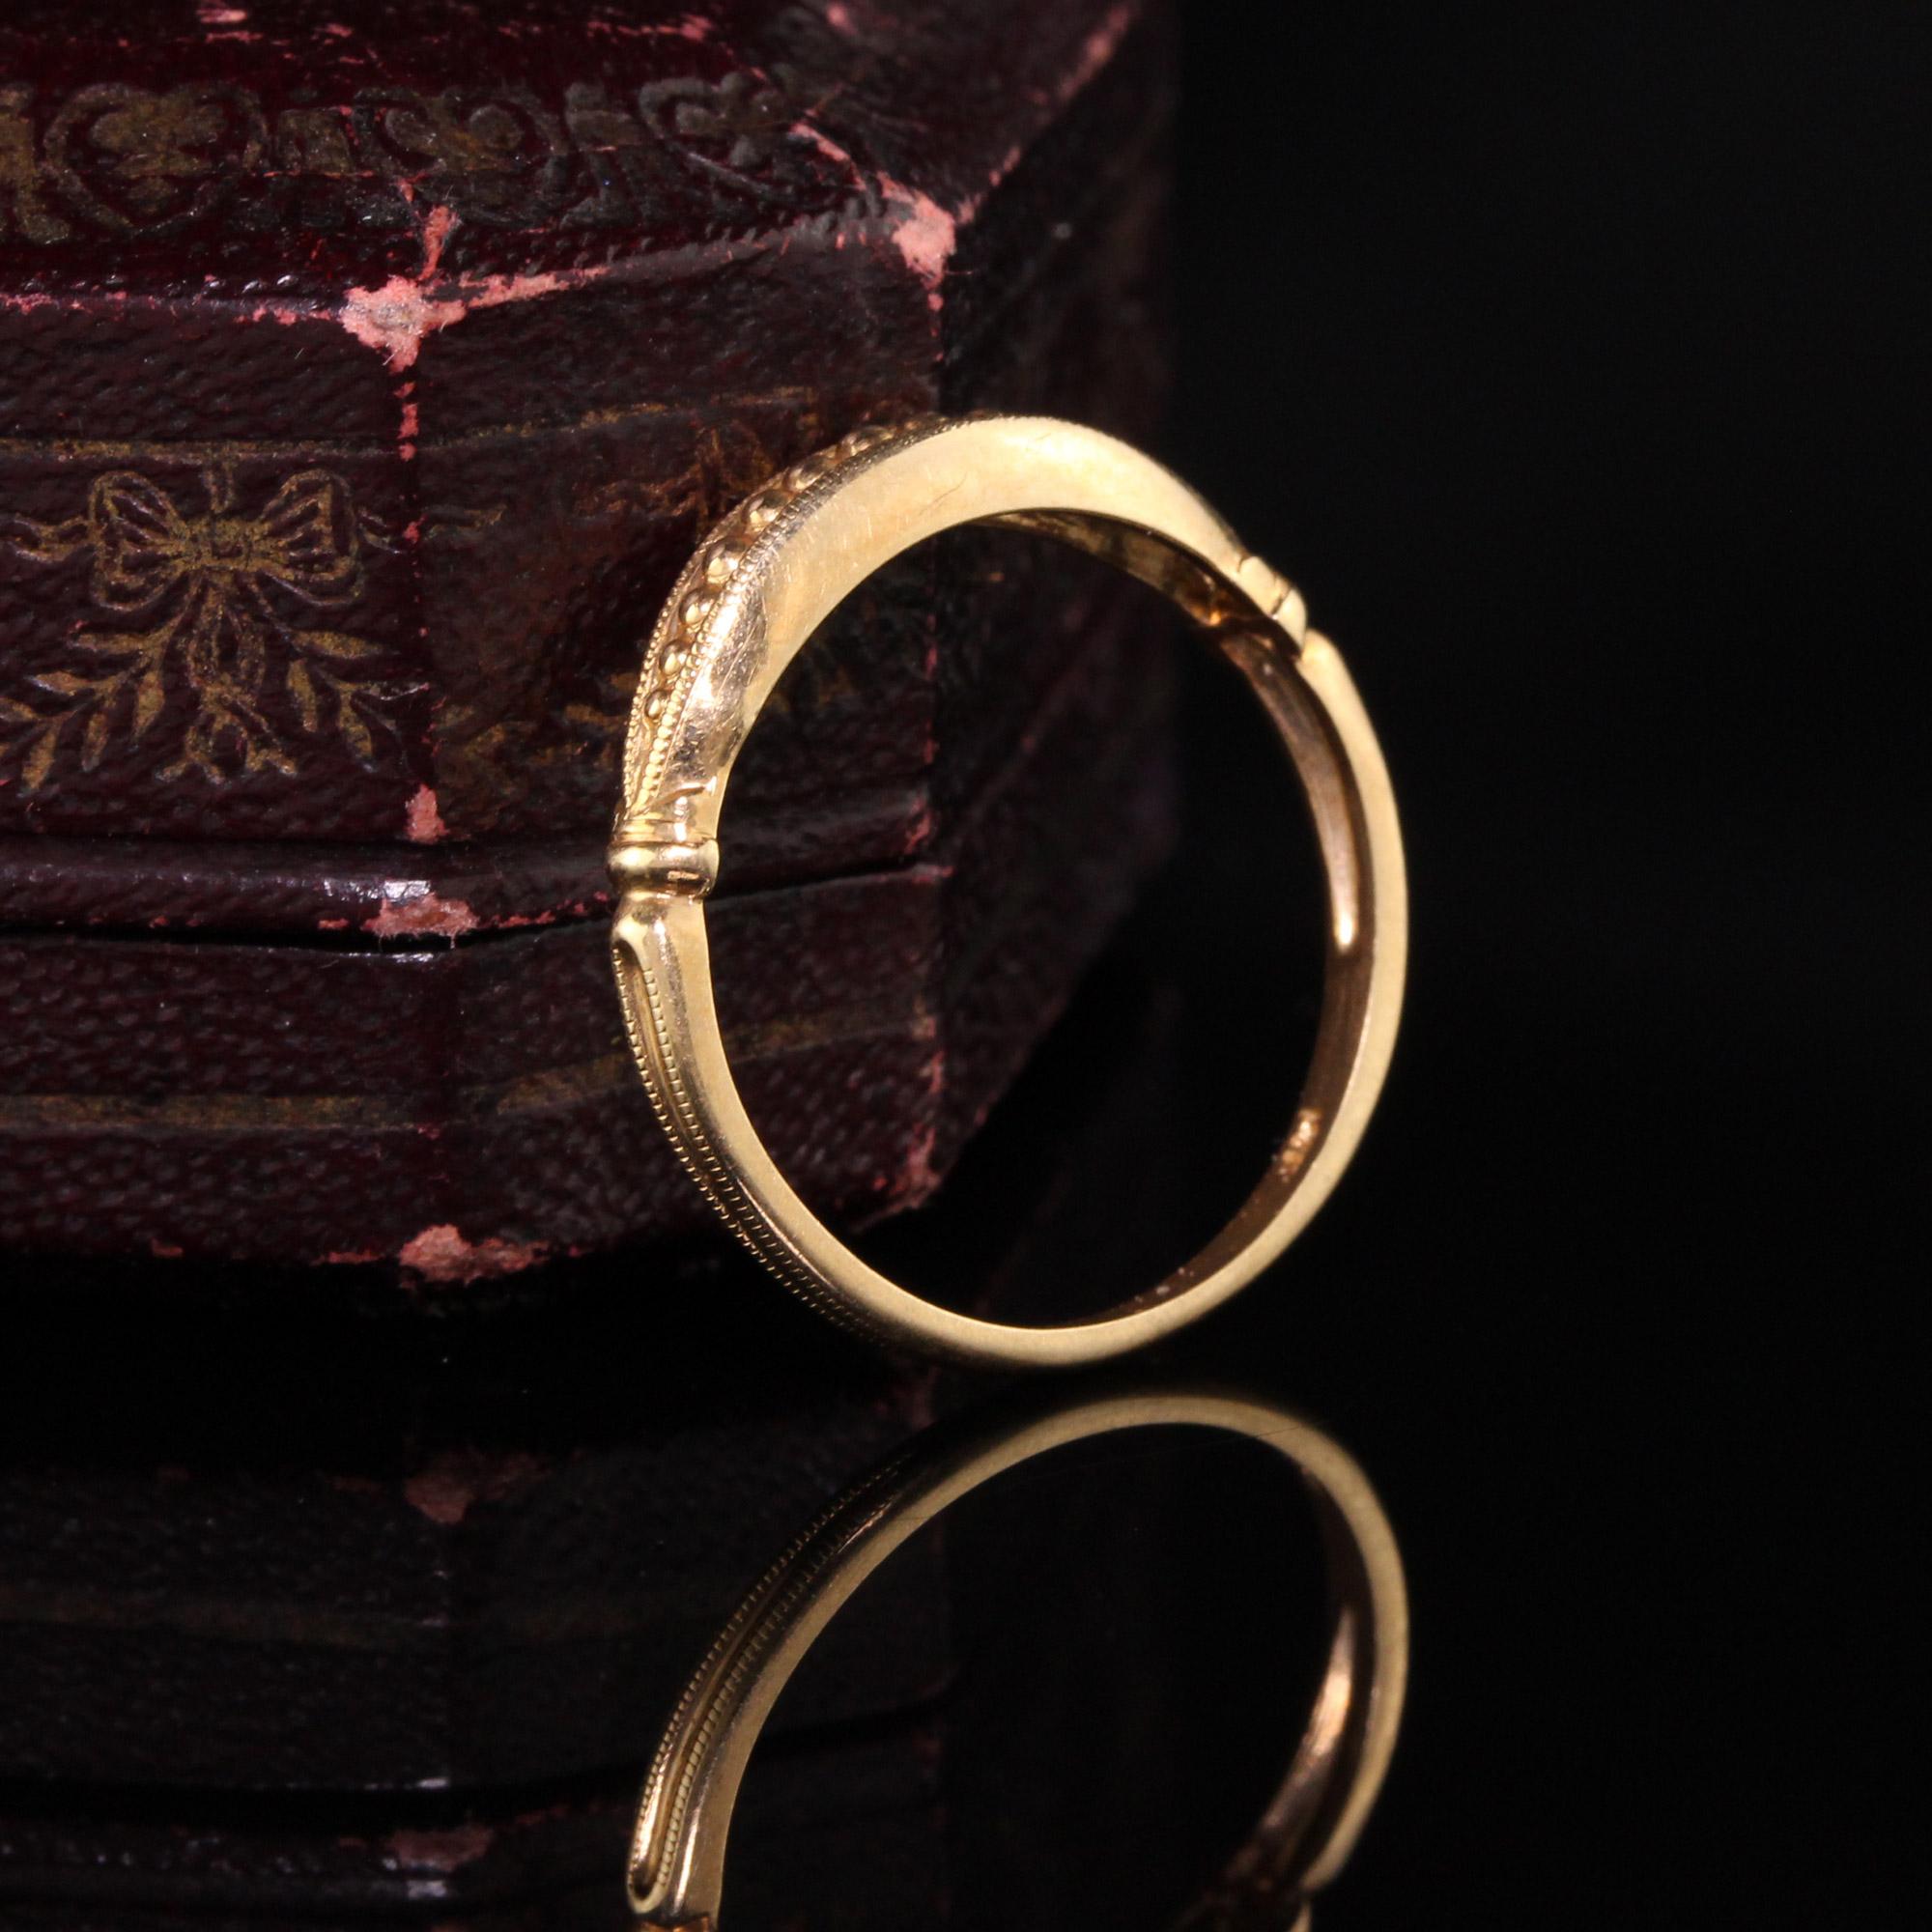 Gorgeous Antique 14K Yellow Gold Bead Wedding Band - Size 5 1/2. This gorgeous pristine wedding band is a new old stock ring that has never been worn before. It has survived 100+ years in a safe and just recently discovered. It is truly a remarkable